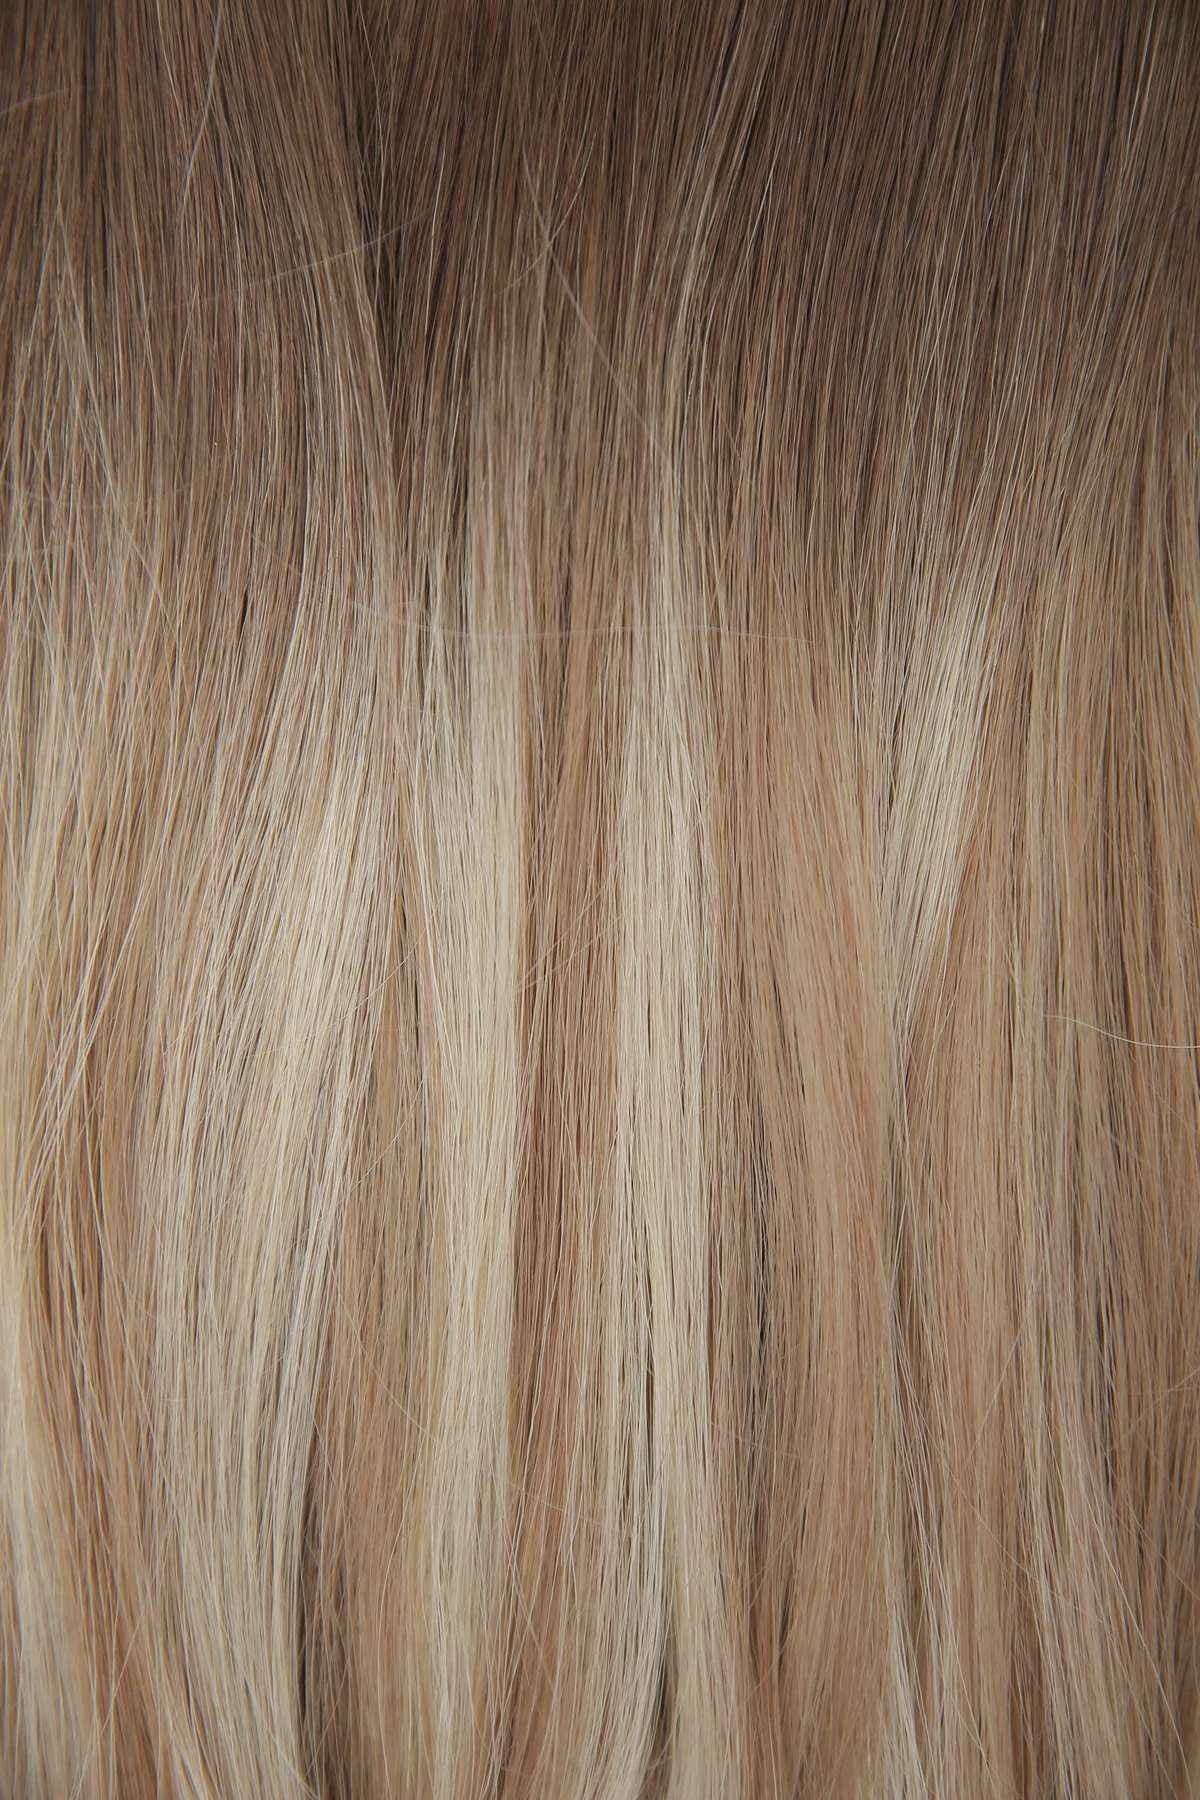 #Iced Coffee Balayage Genius Weft Hair Extensions